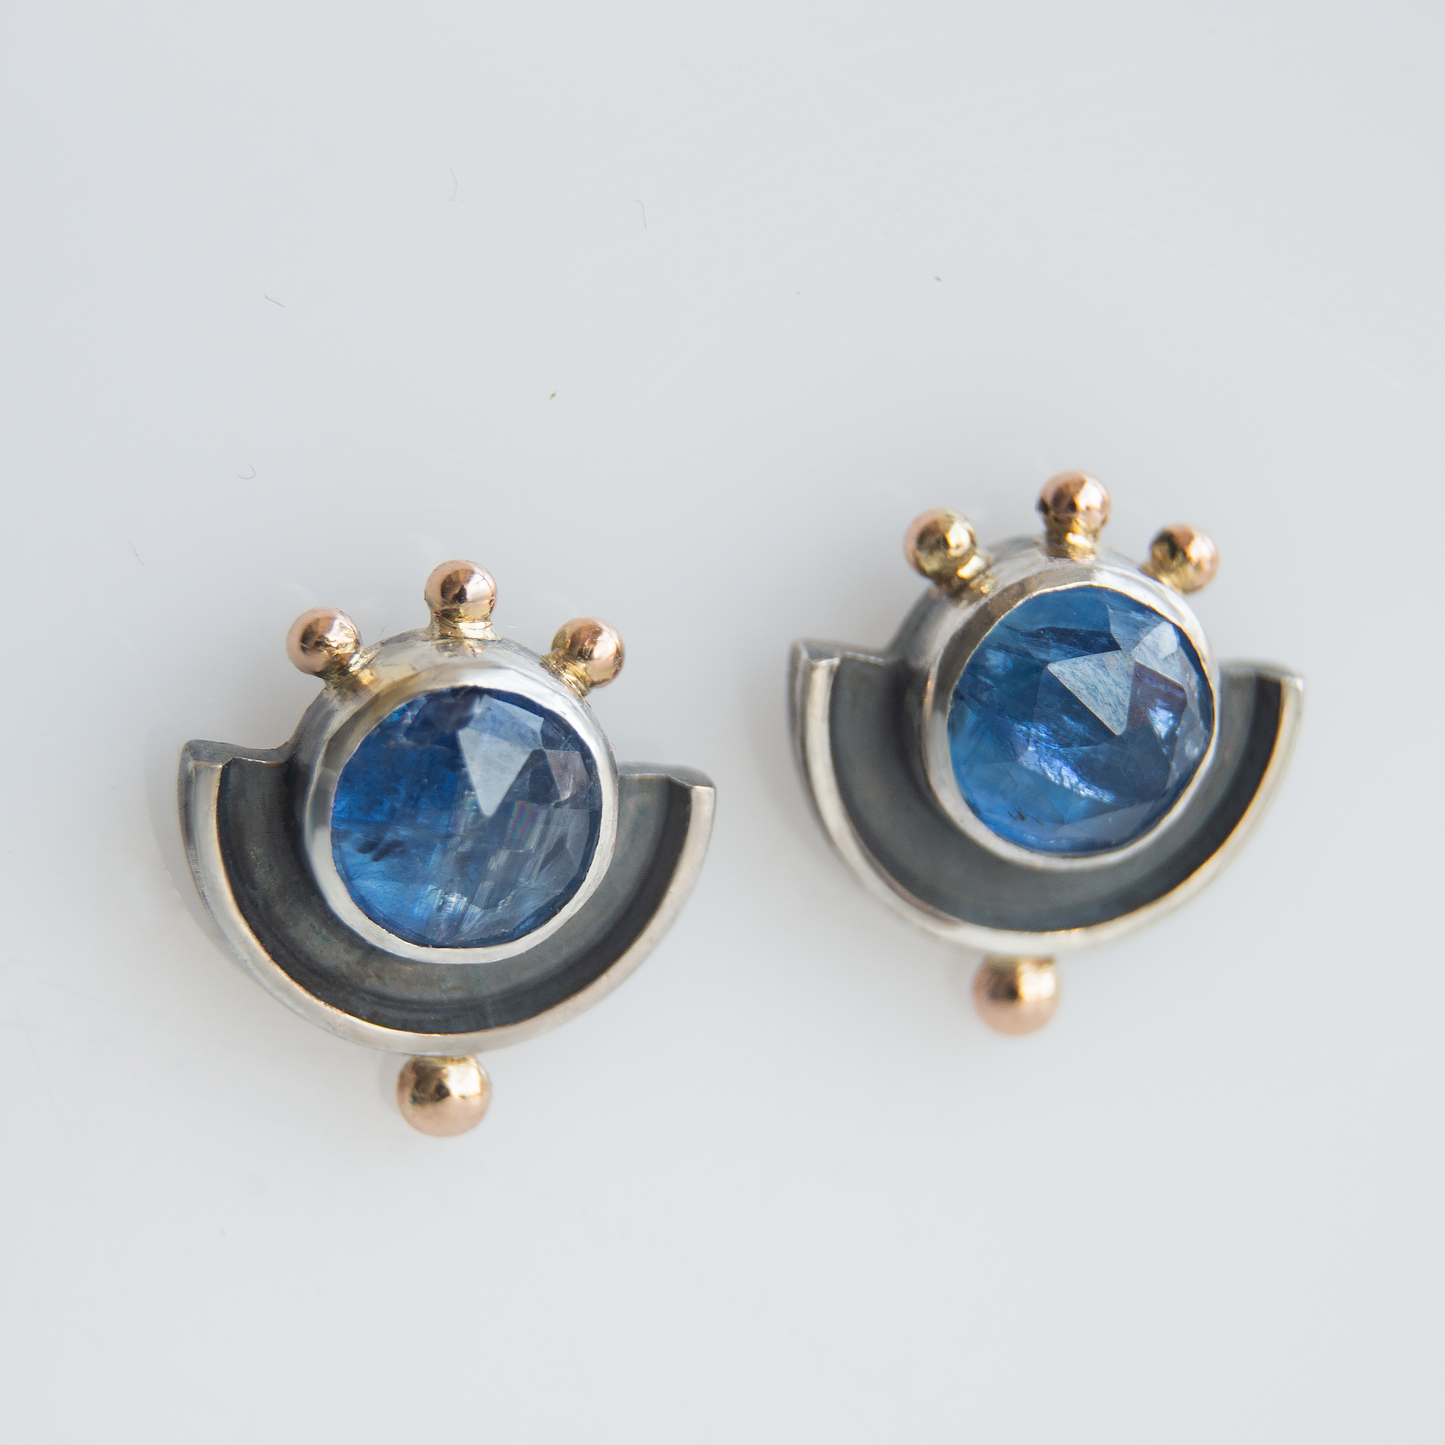 Kyanite Stone, Semicircle, Minimalistic Earrings With 14k Gold Beads